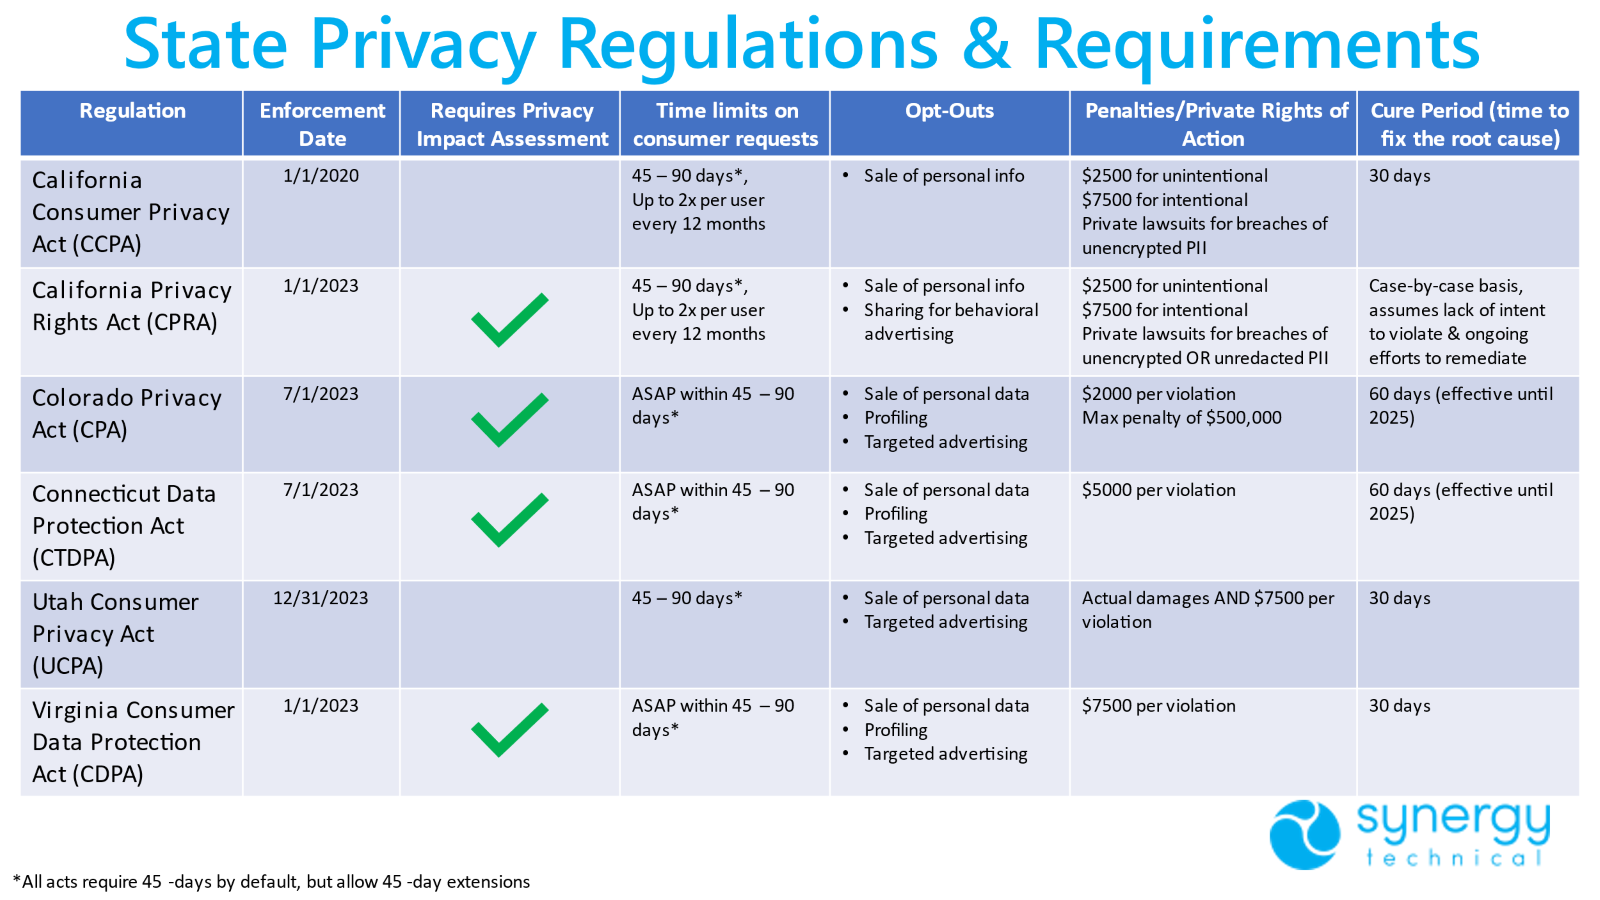 Picture showing list of state privacy regulations & requirements